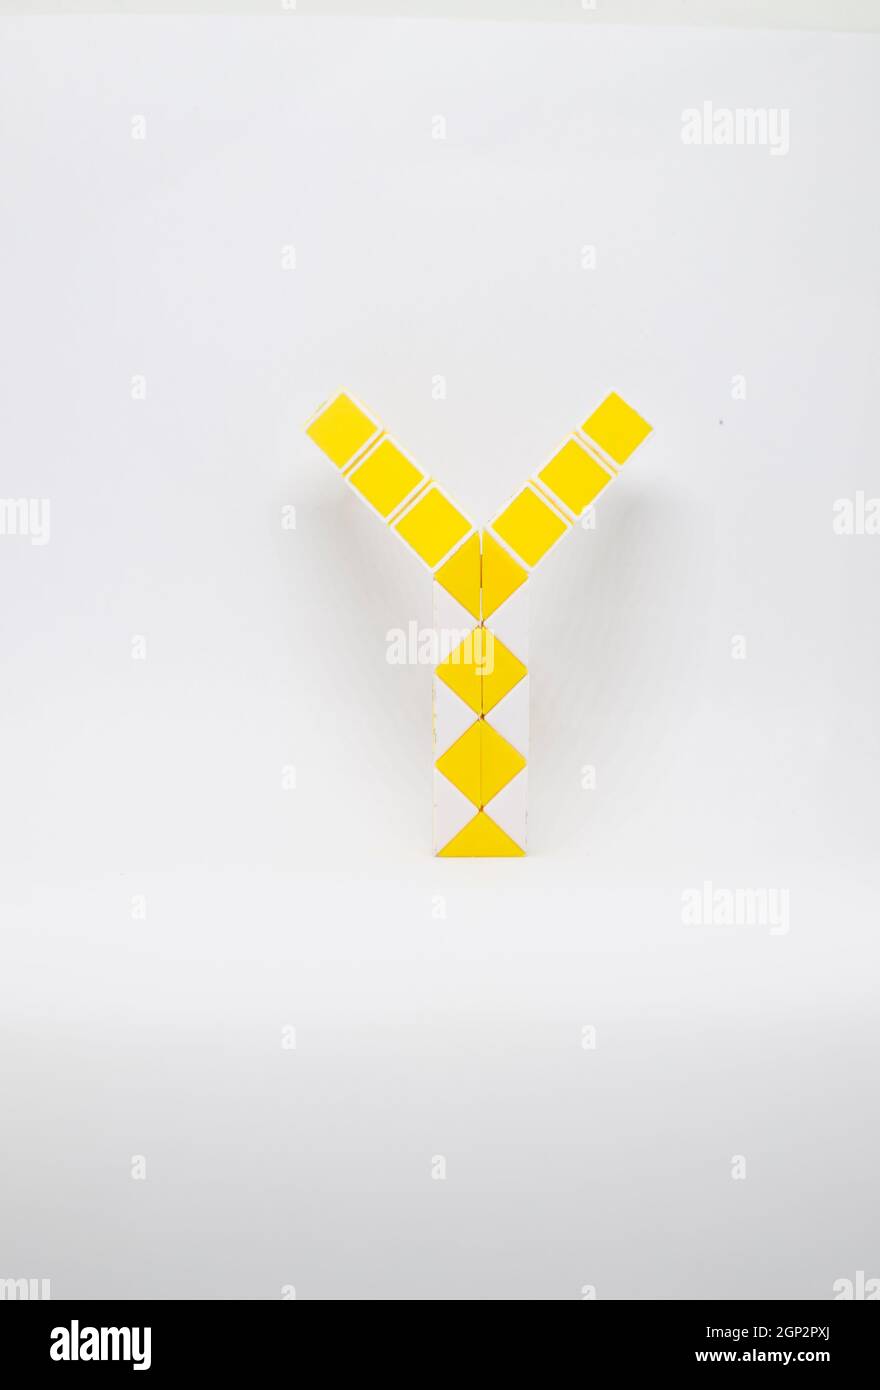 Letter 'y' made of yellow and white triangles on a white background. Stock Photo